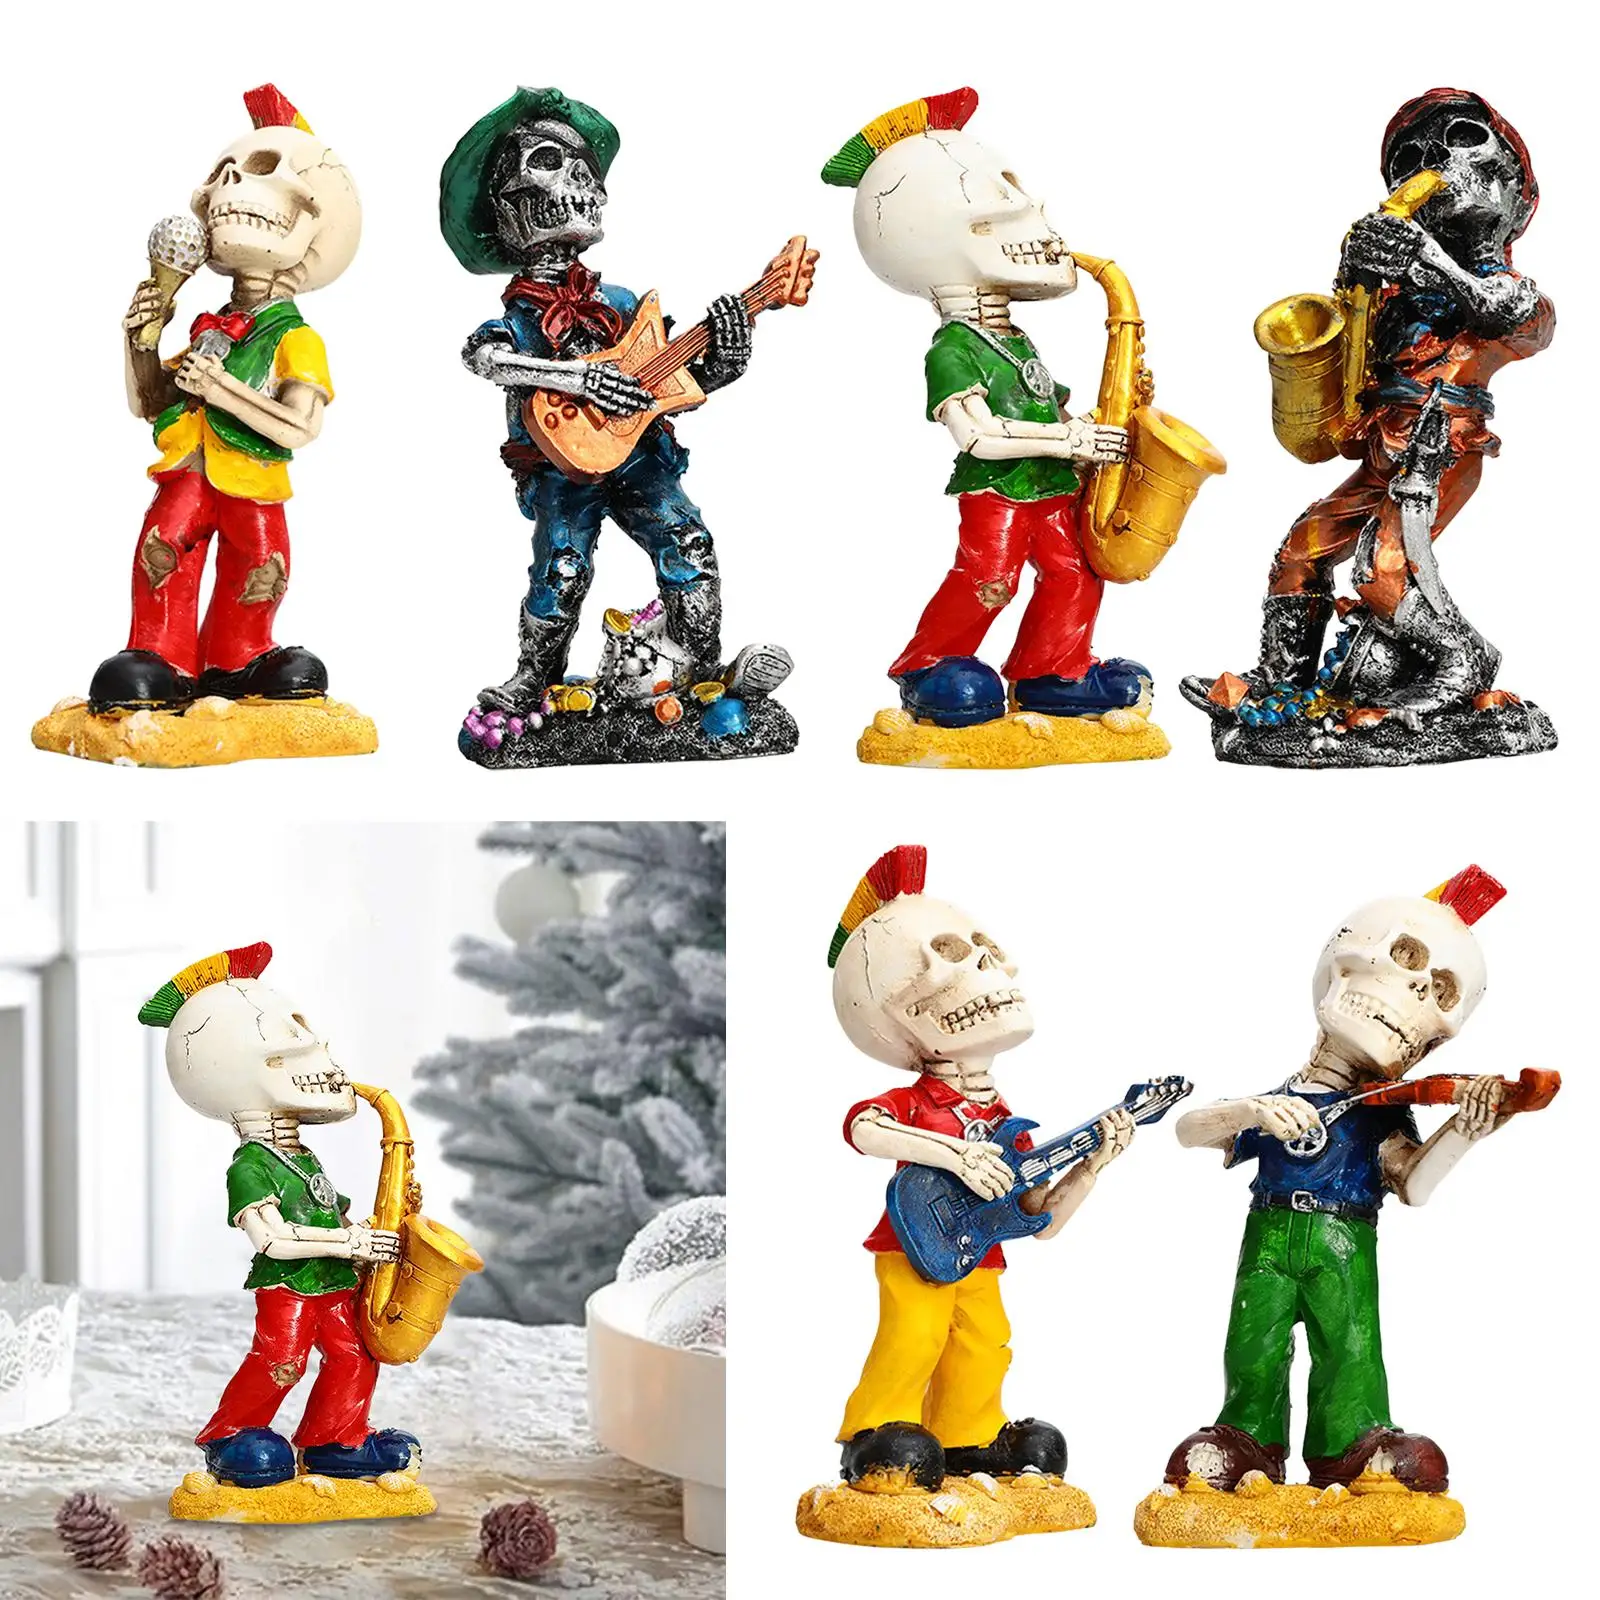 Collectible Musician Figurines Band Figurine Skeleton Statue for Home Office